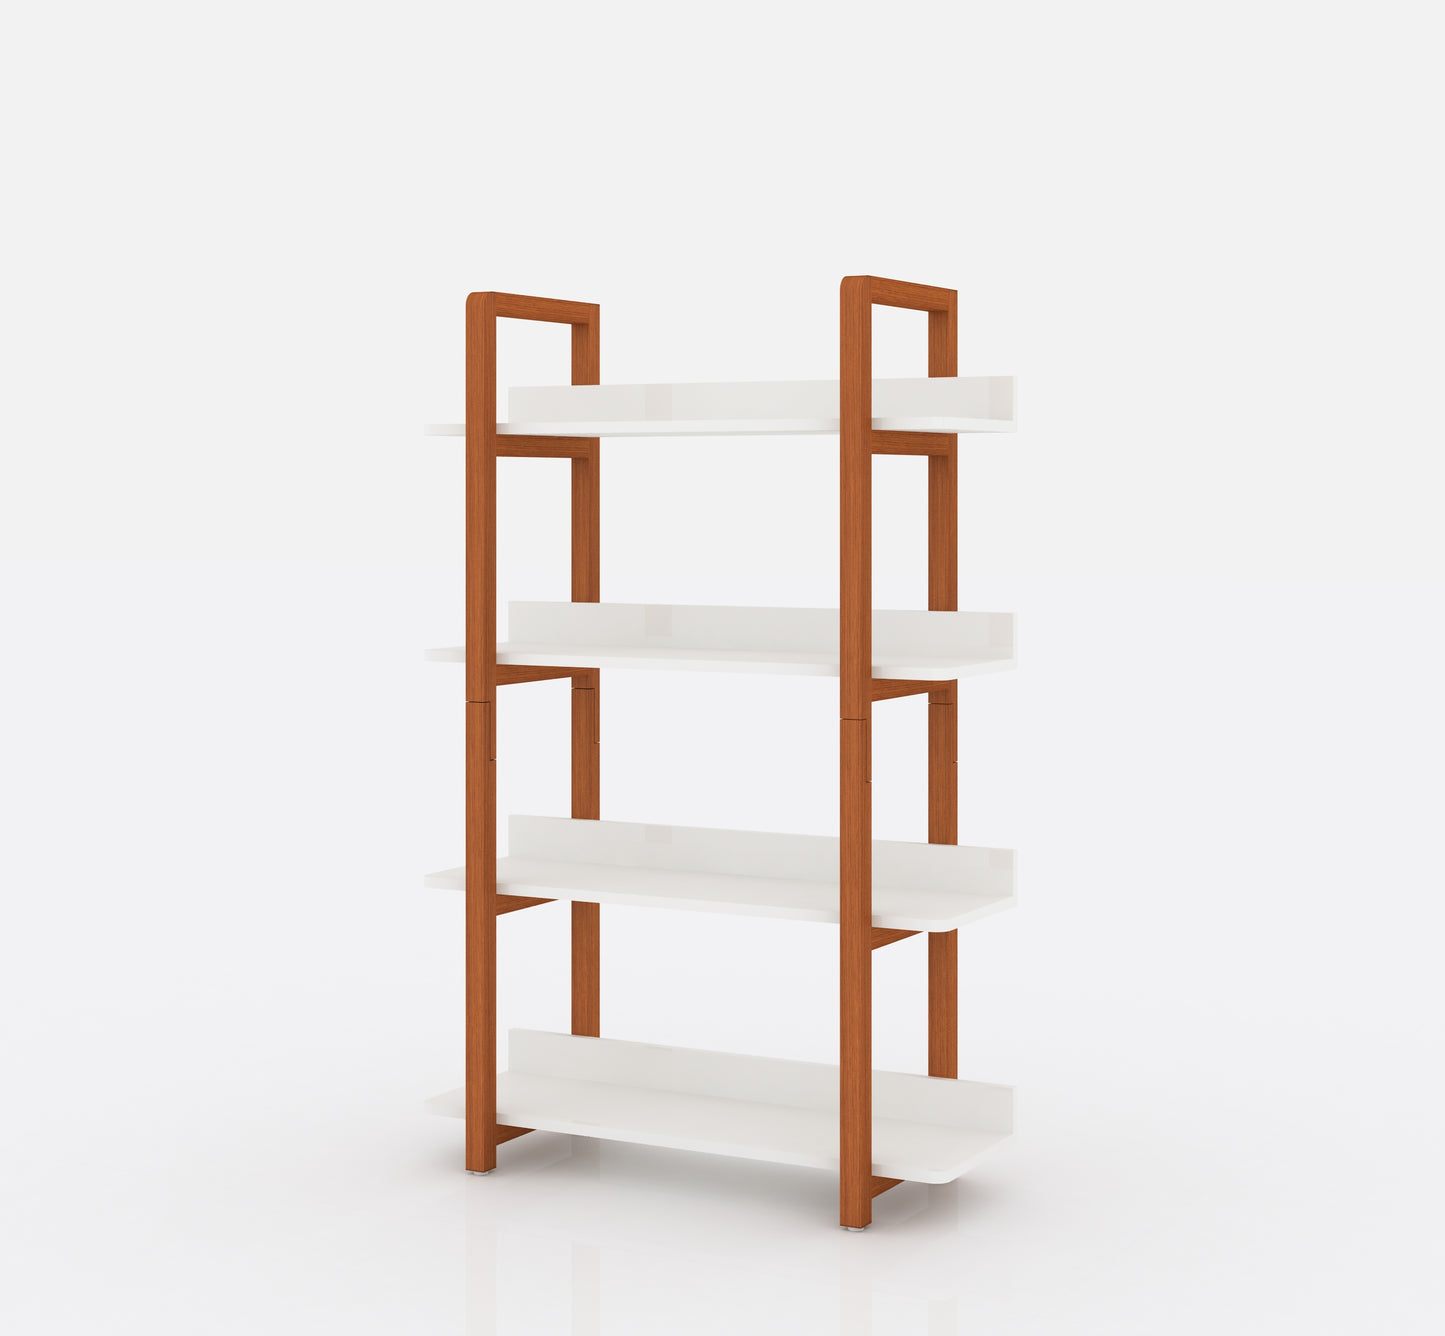 Solid wood bookshelf,The four layer multifunctional open shelf can also be used as a bookshelf or plant rackbookshelf or plant rack